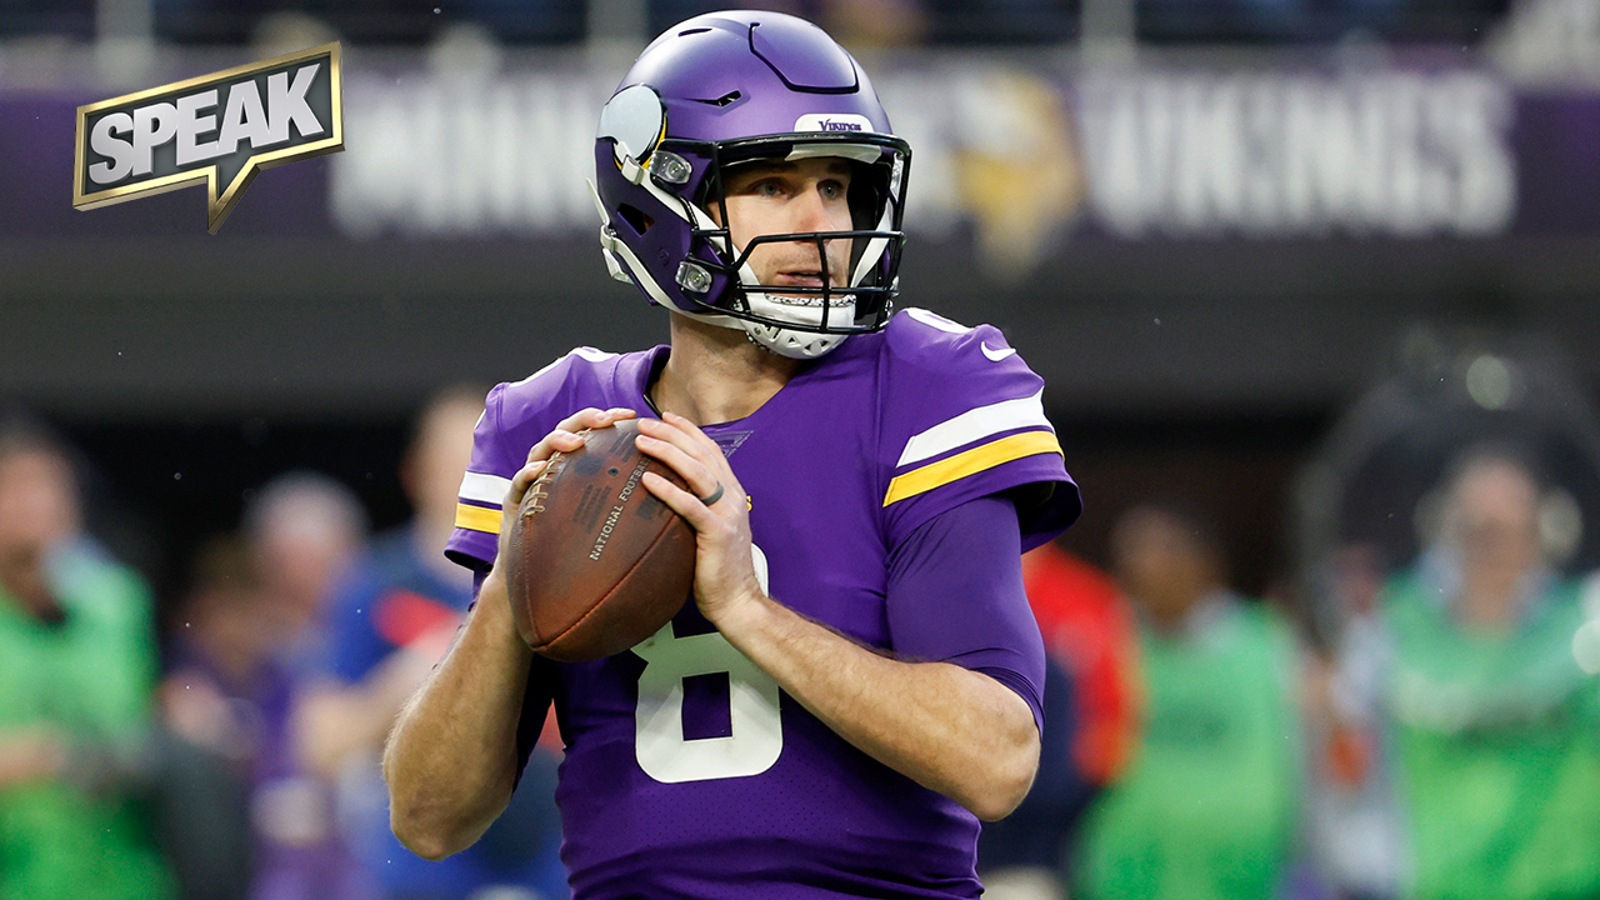 Can Kirk Cousins get the Vikings over the hump this season?